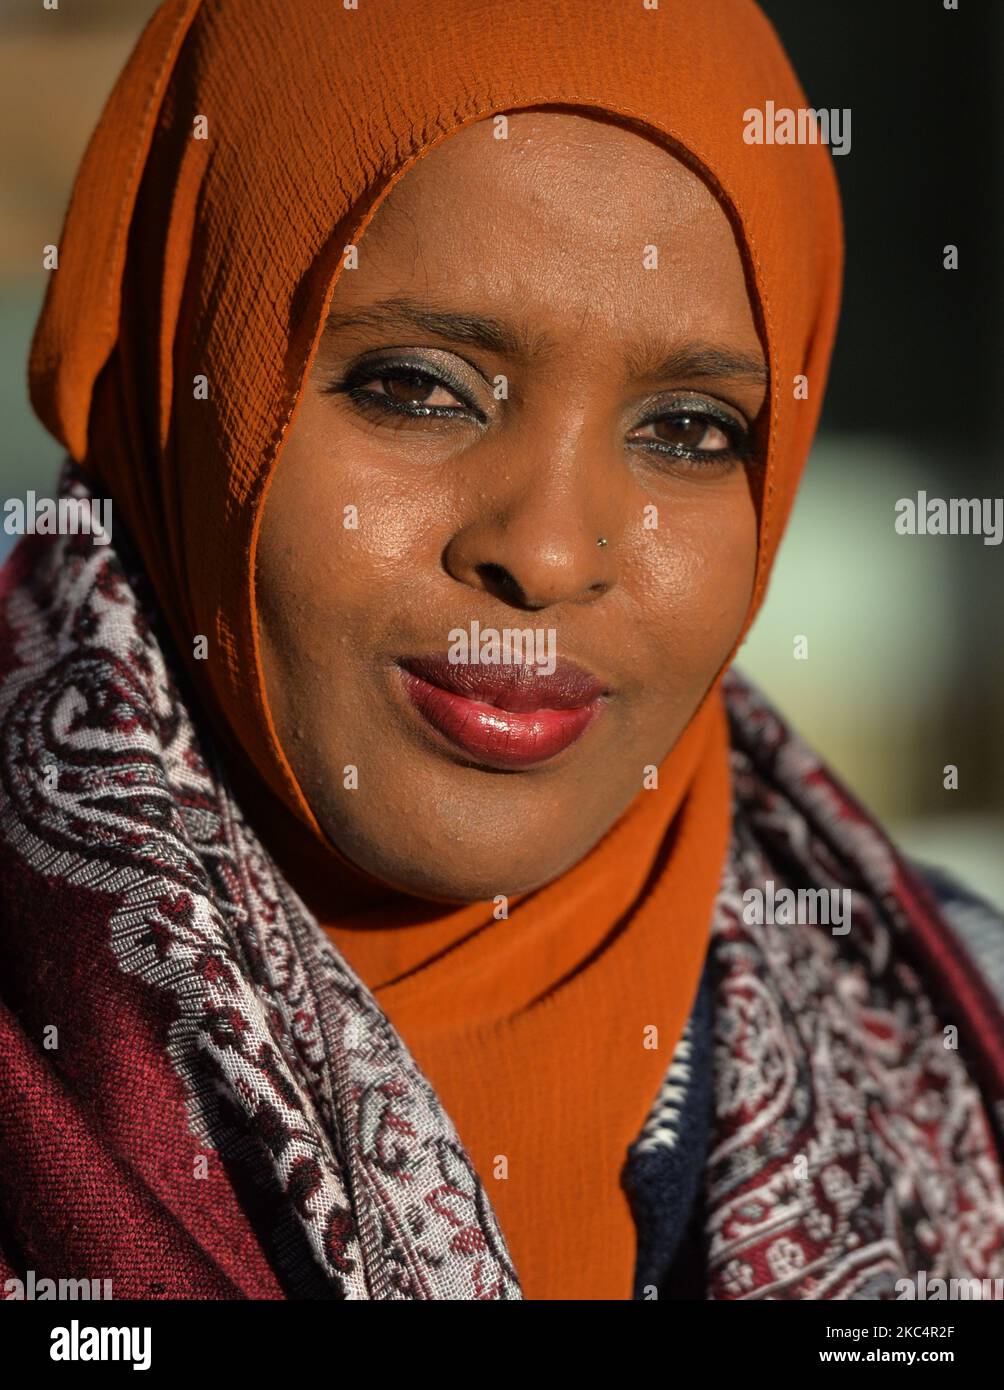 A portrait of Ifrah Ahmed, a Somali-Irish social activist. Born into a refugee camp in war-torn Somalia, Ifrah was trafficked to Ireland as a teenager. Recounting her traumatic childhood experiences of Female Genital Mutilation / Cutting (FGM/C) when applying for refugee status, she was again traumatized and decided to devote her life to the eradication of the practice. Ifrah emerged as one of the worlds foremost international activists against Gender Based Violence, after she took her campaign all the way to the President of Ireland and finally to the European Parliament and United Nations. S Stock Photo